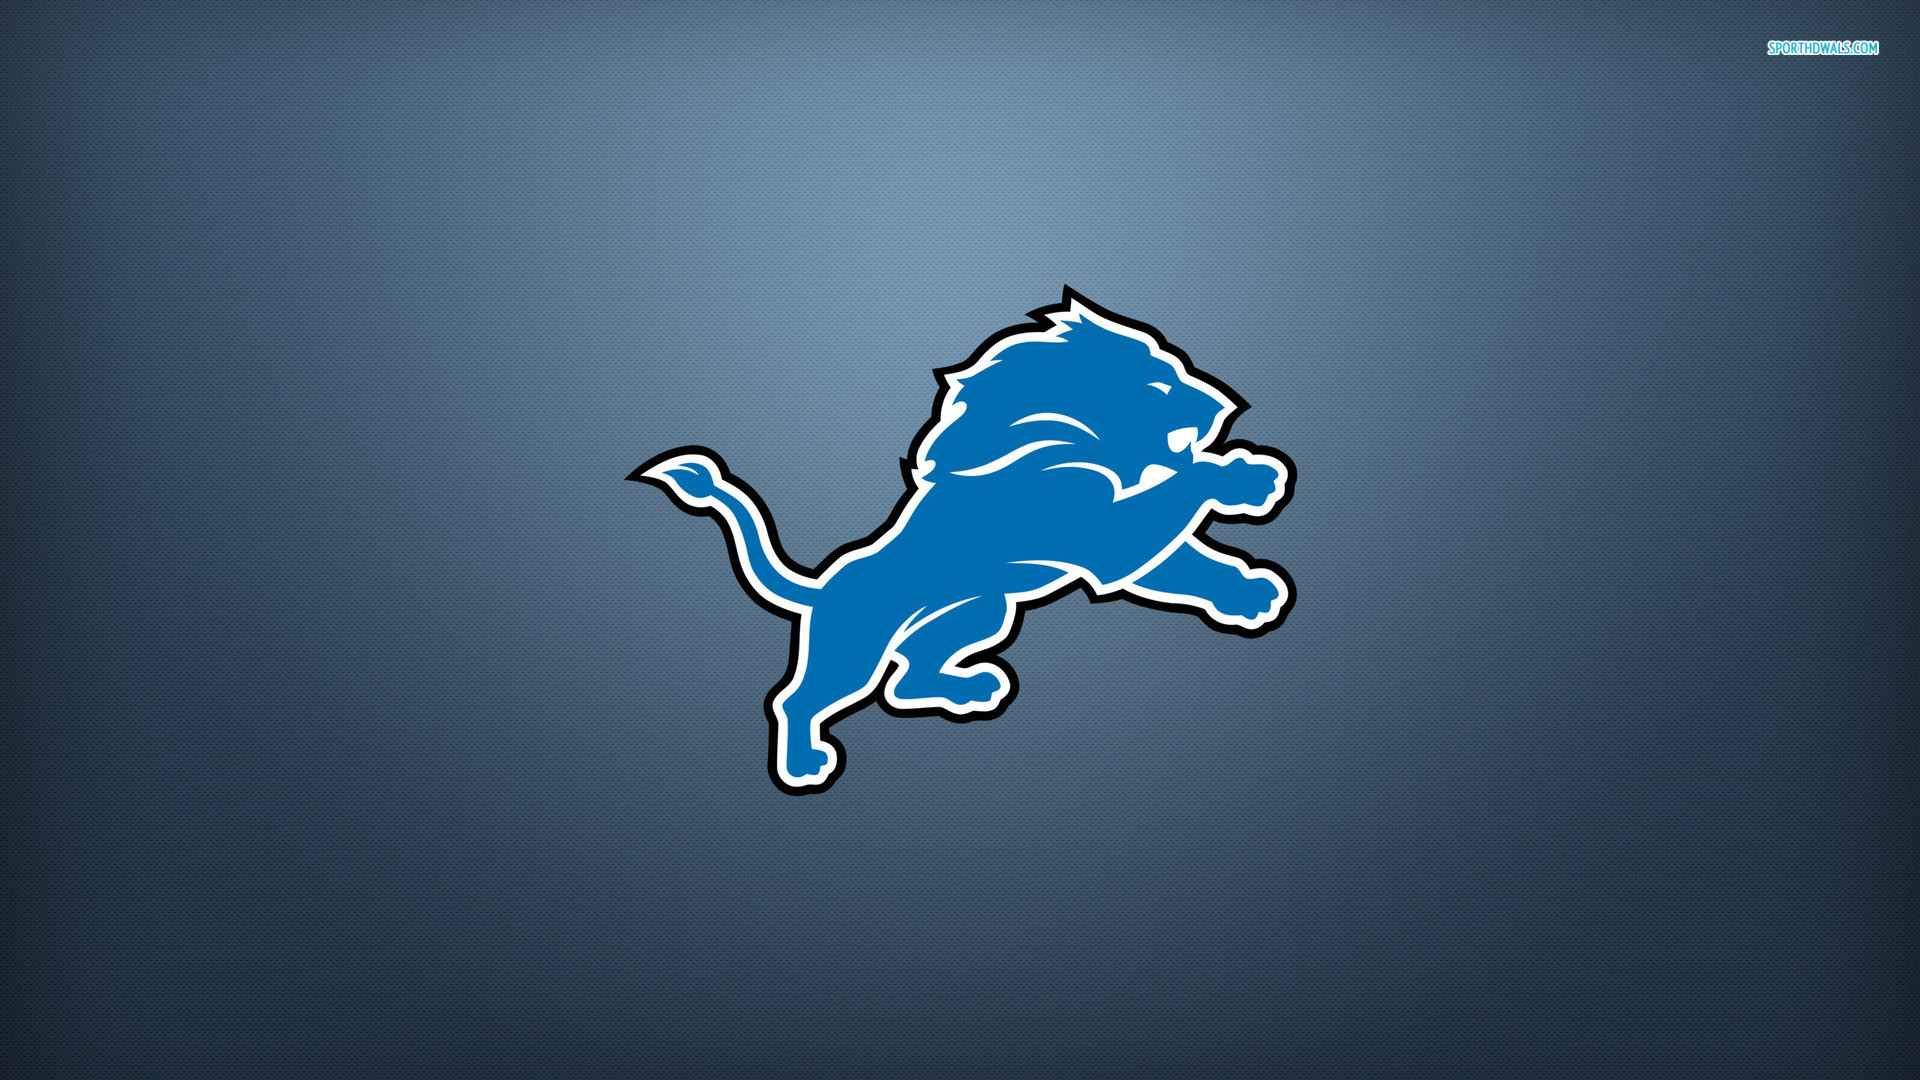 1920x1080 Detroit Lions Wallpaper Collection For Free Download | HD Wallpapers |  Pinterest | Detroit lions wallpaper